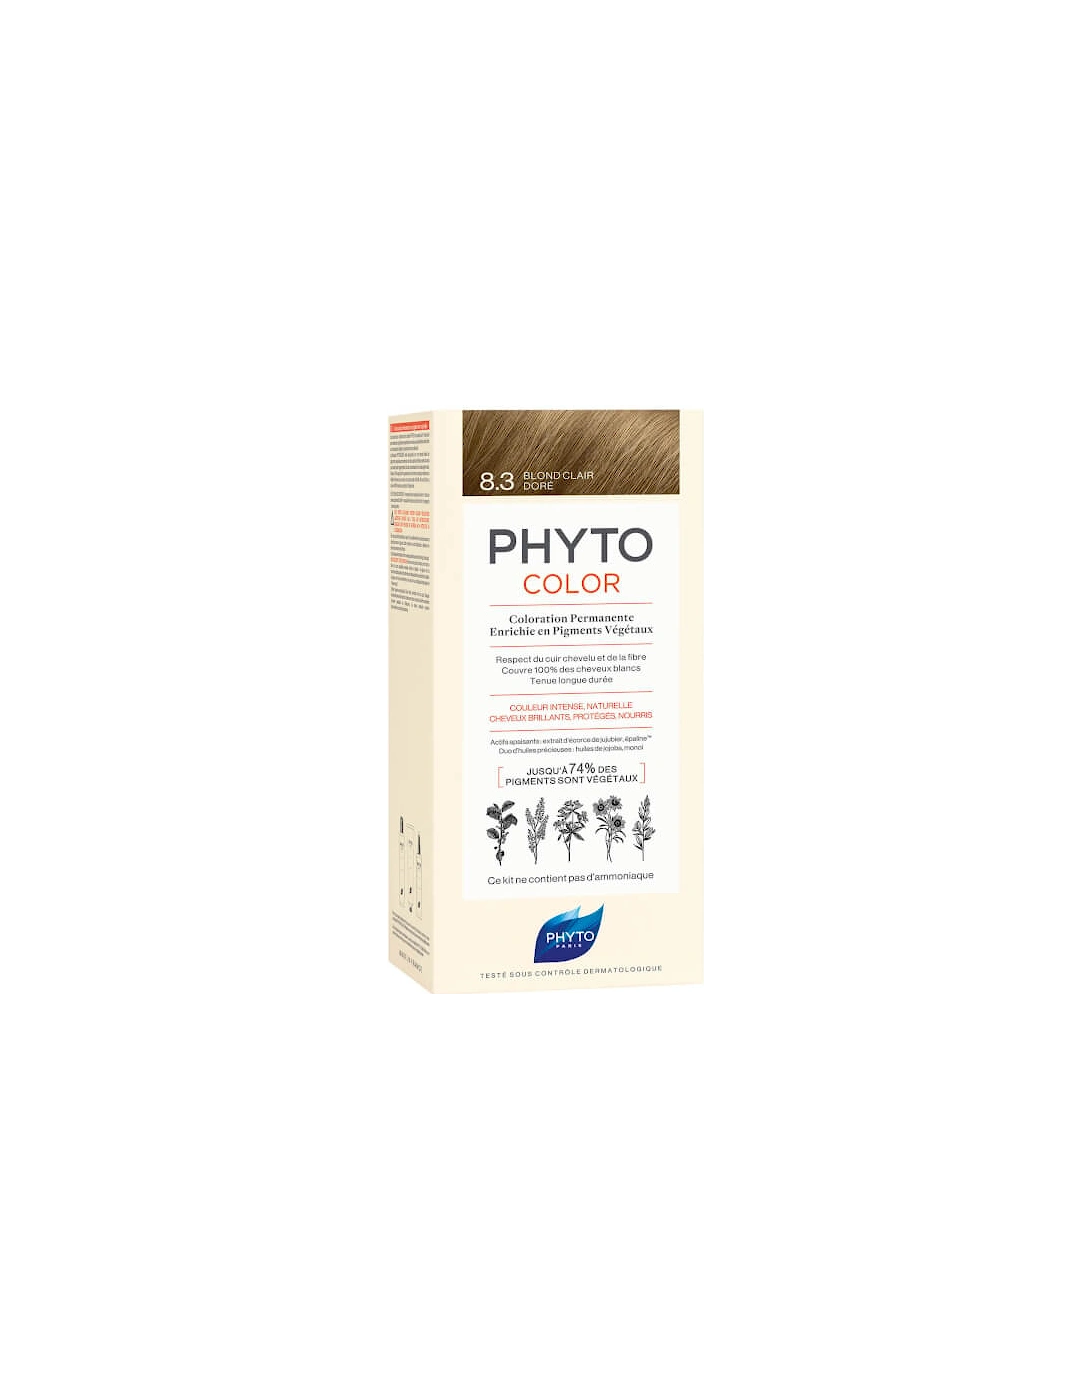 Hair Colour by Phytocolor - 8.3 Light Golden Blonde 180g - Phyto, 2 of 1